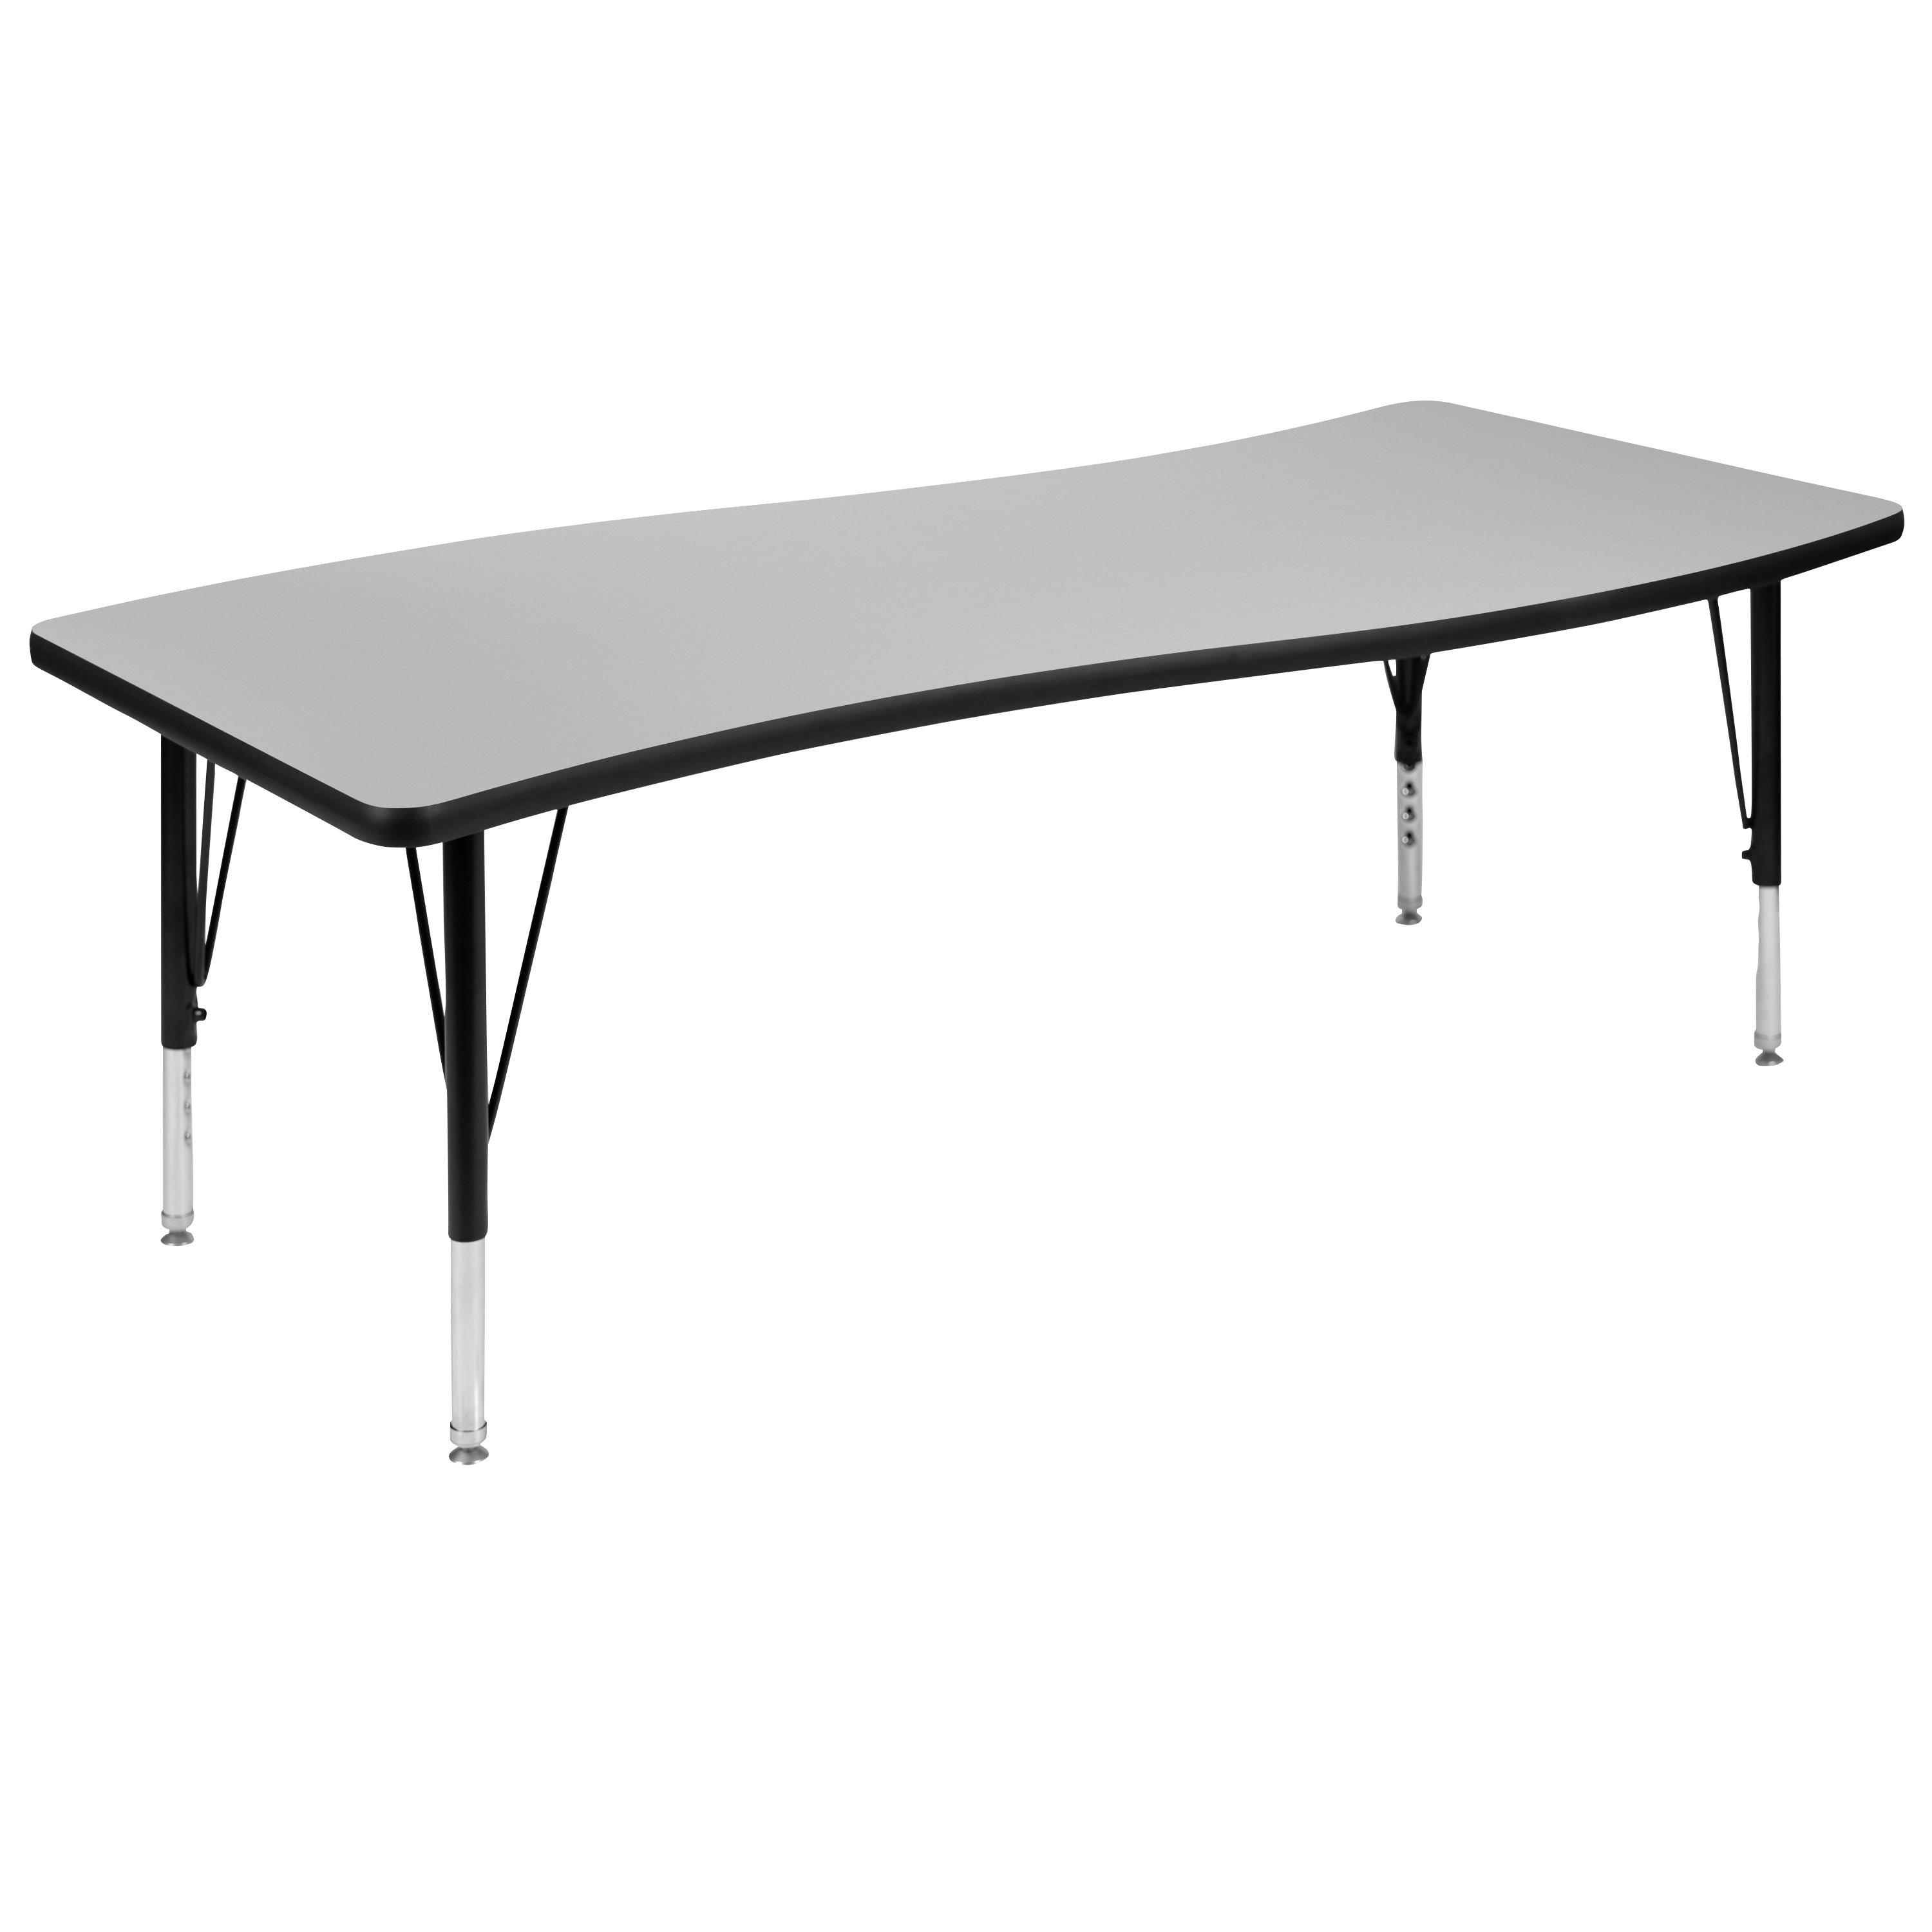 3 Piece 86" Oval Wave Flexible Grey Thermal Laminate Activity Table Set - Height Adjustable Short Legs-Collaborative Activity Table Set-Flash Furniture-Wall2Wall Furnishings